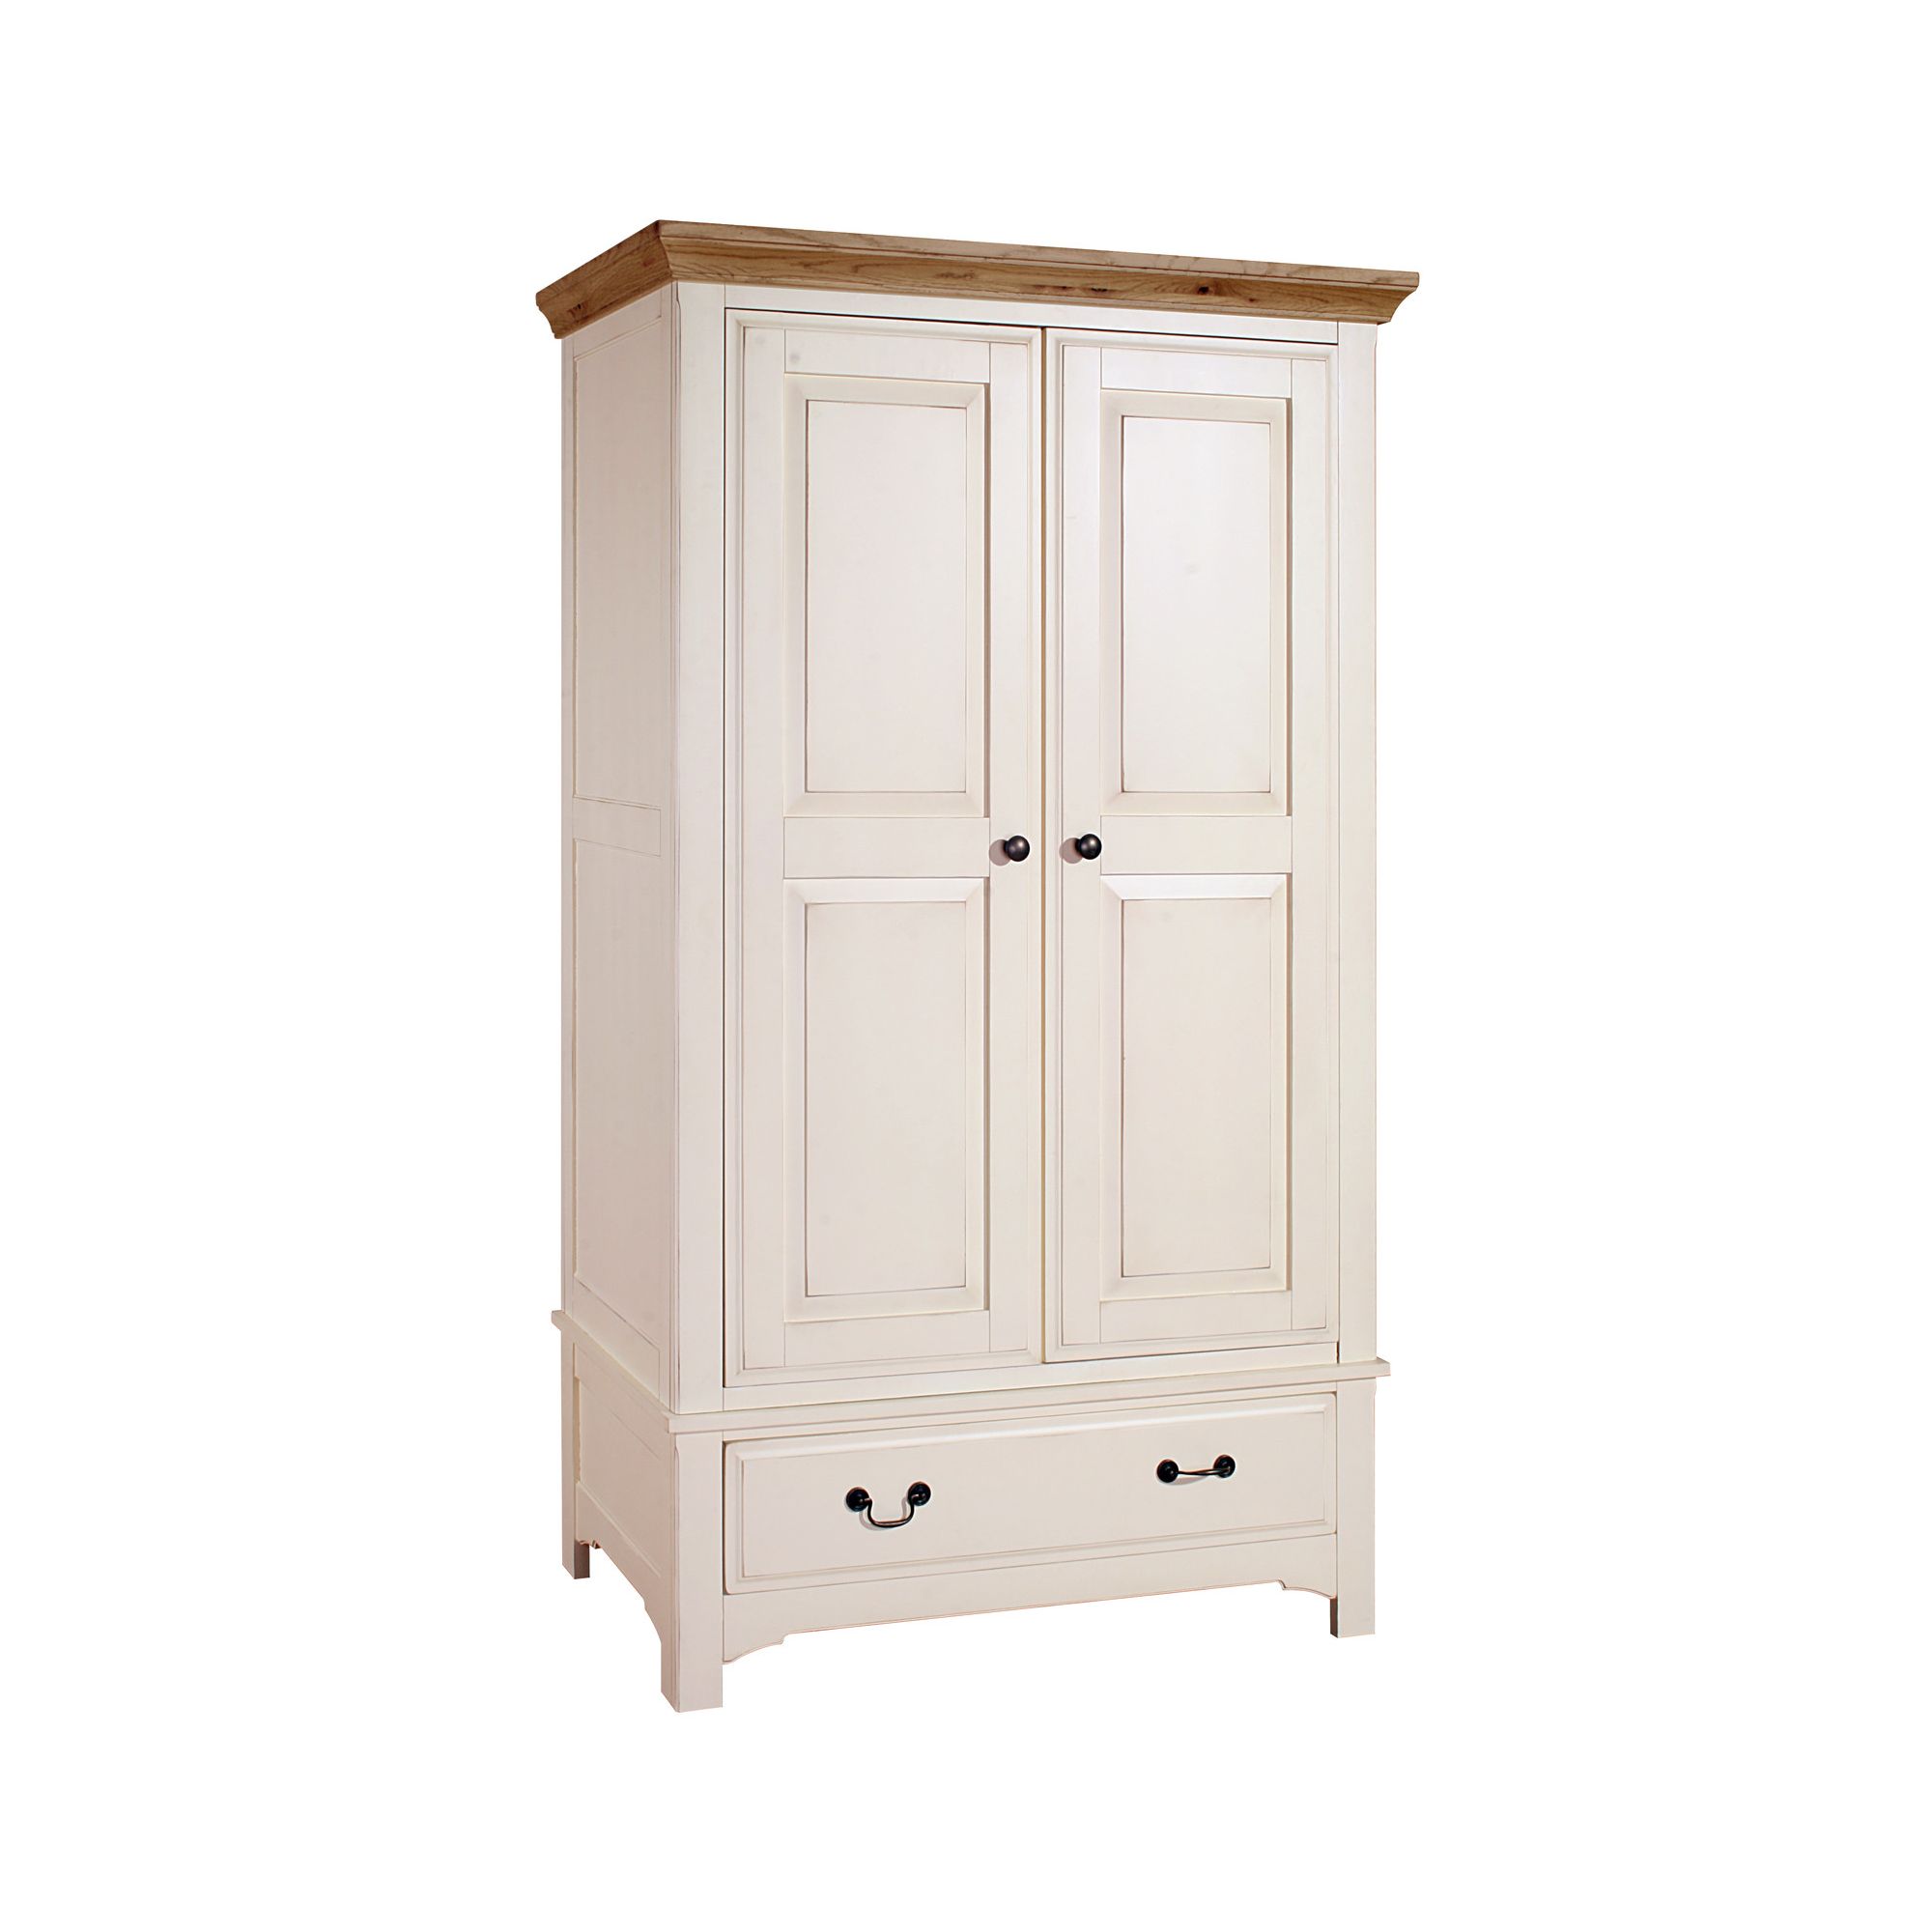 Alterton Furniture Marseille Double Wardrobe with Drawer at Tesco Direct